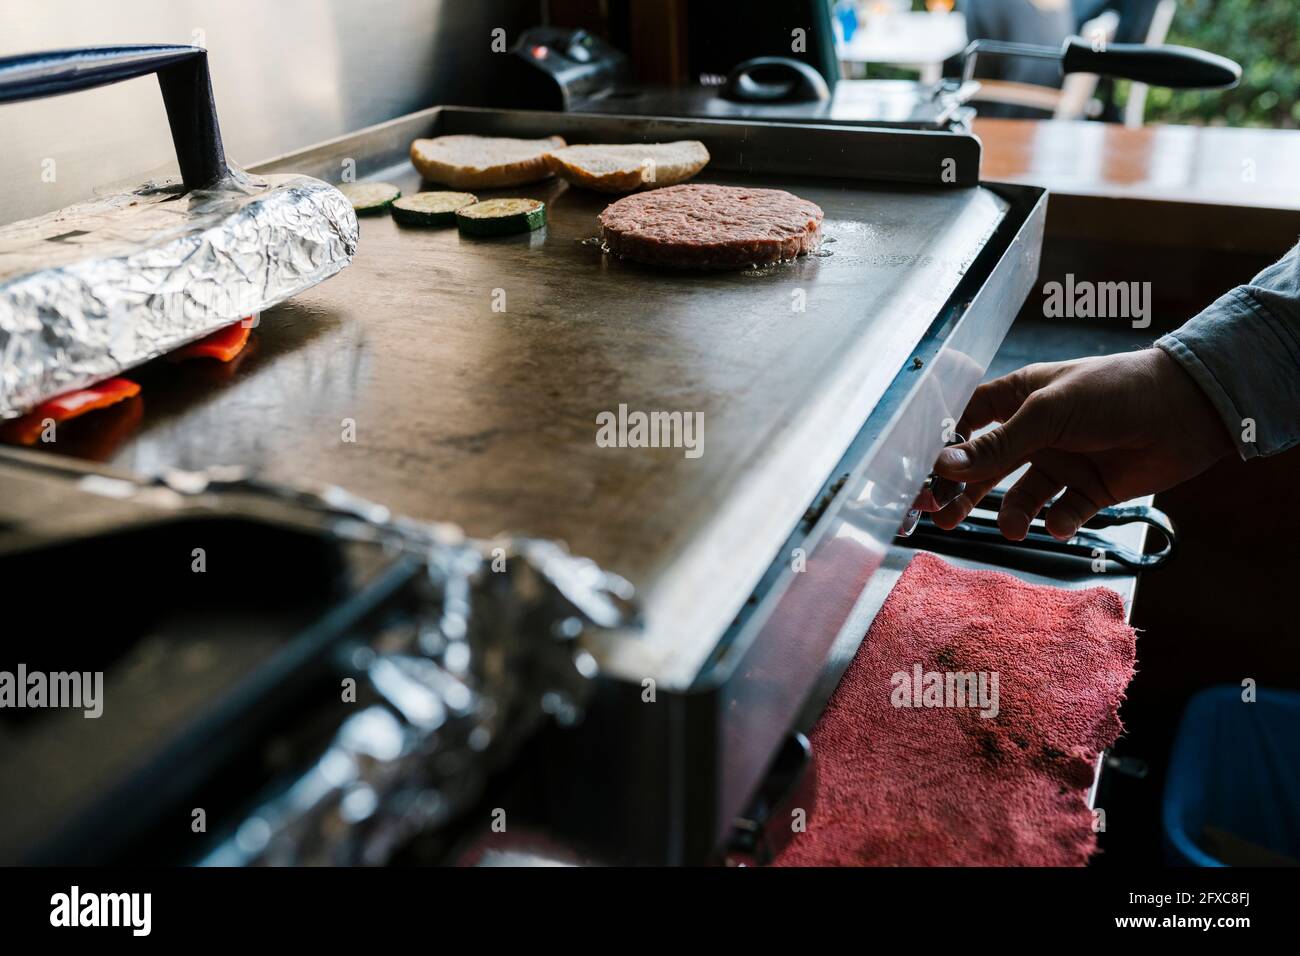 Burger patty on griddle at restaurant Stock Photo